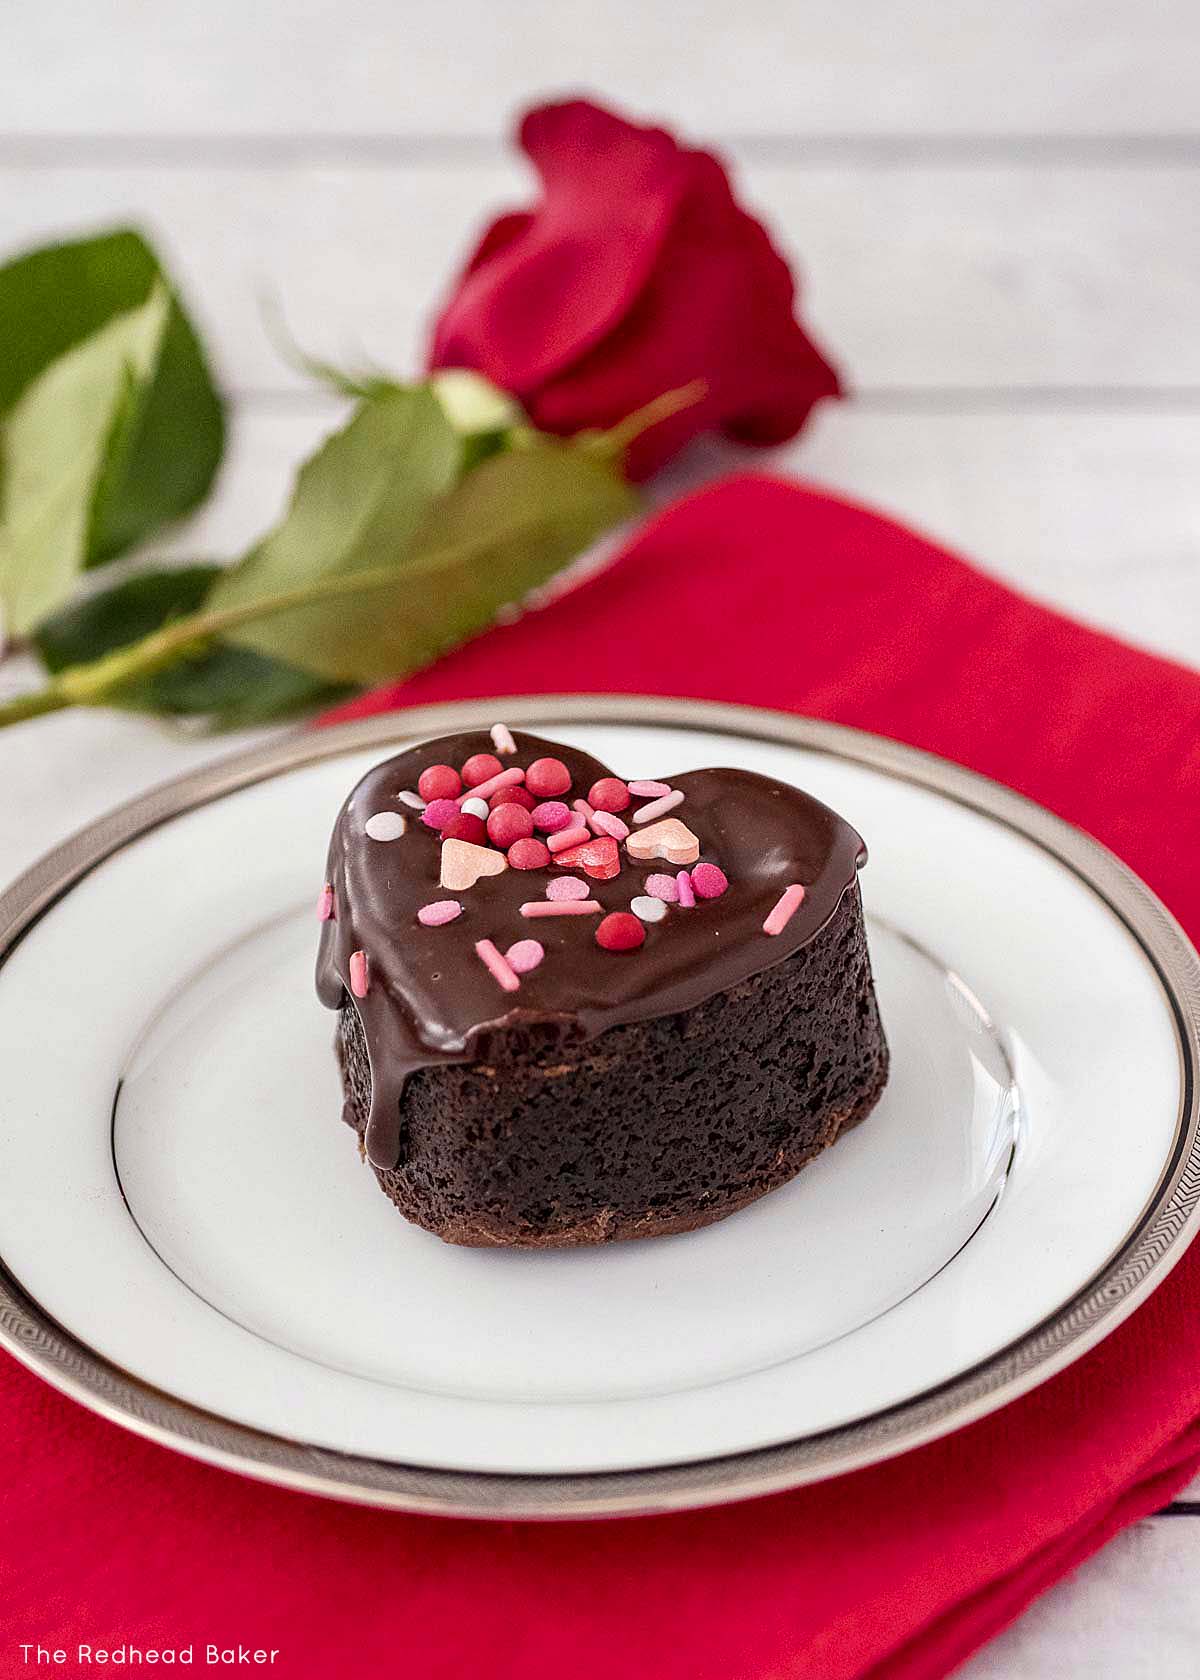 A chocolate-covered brownie heart on a white plate with a red rose